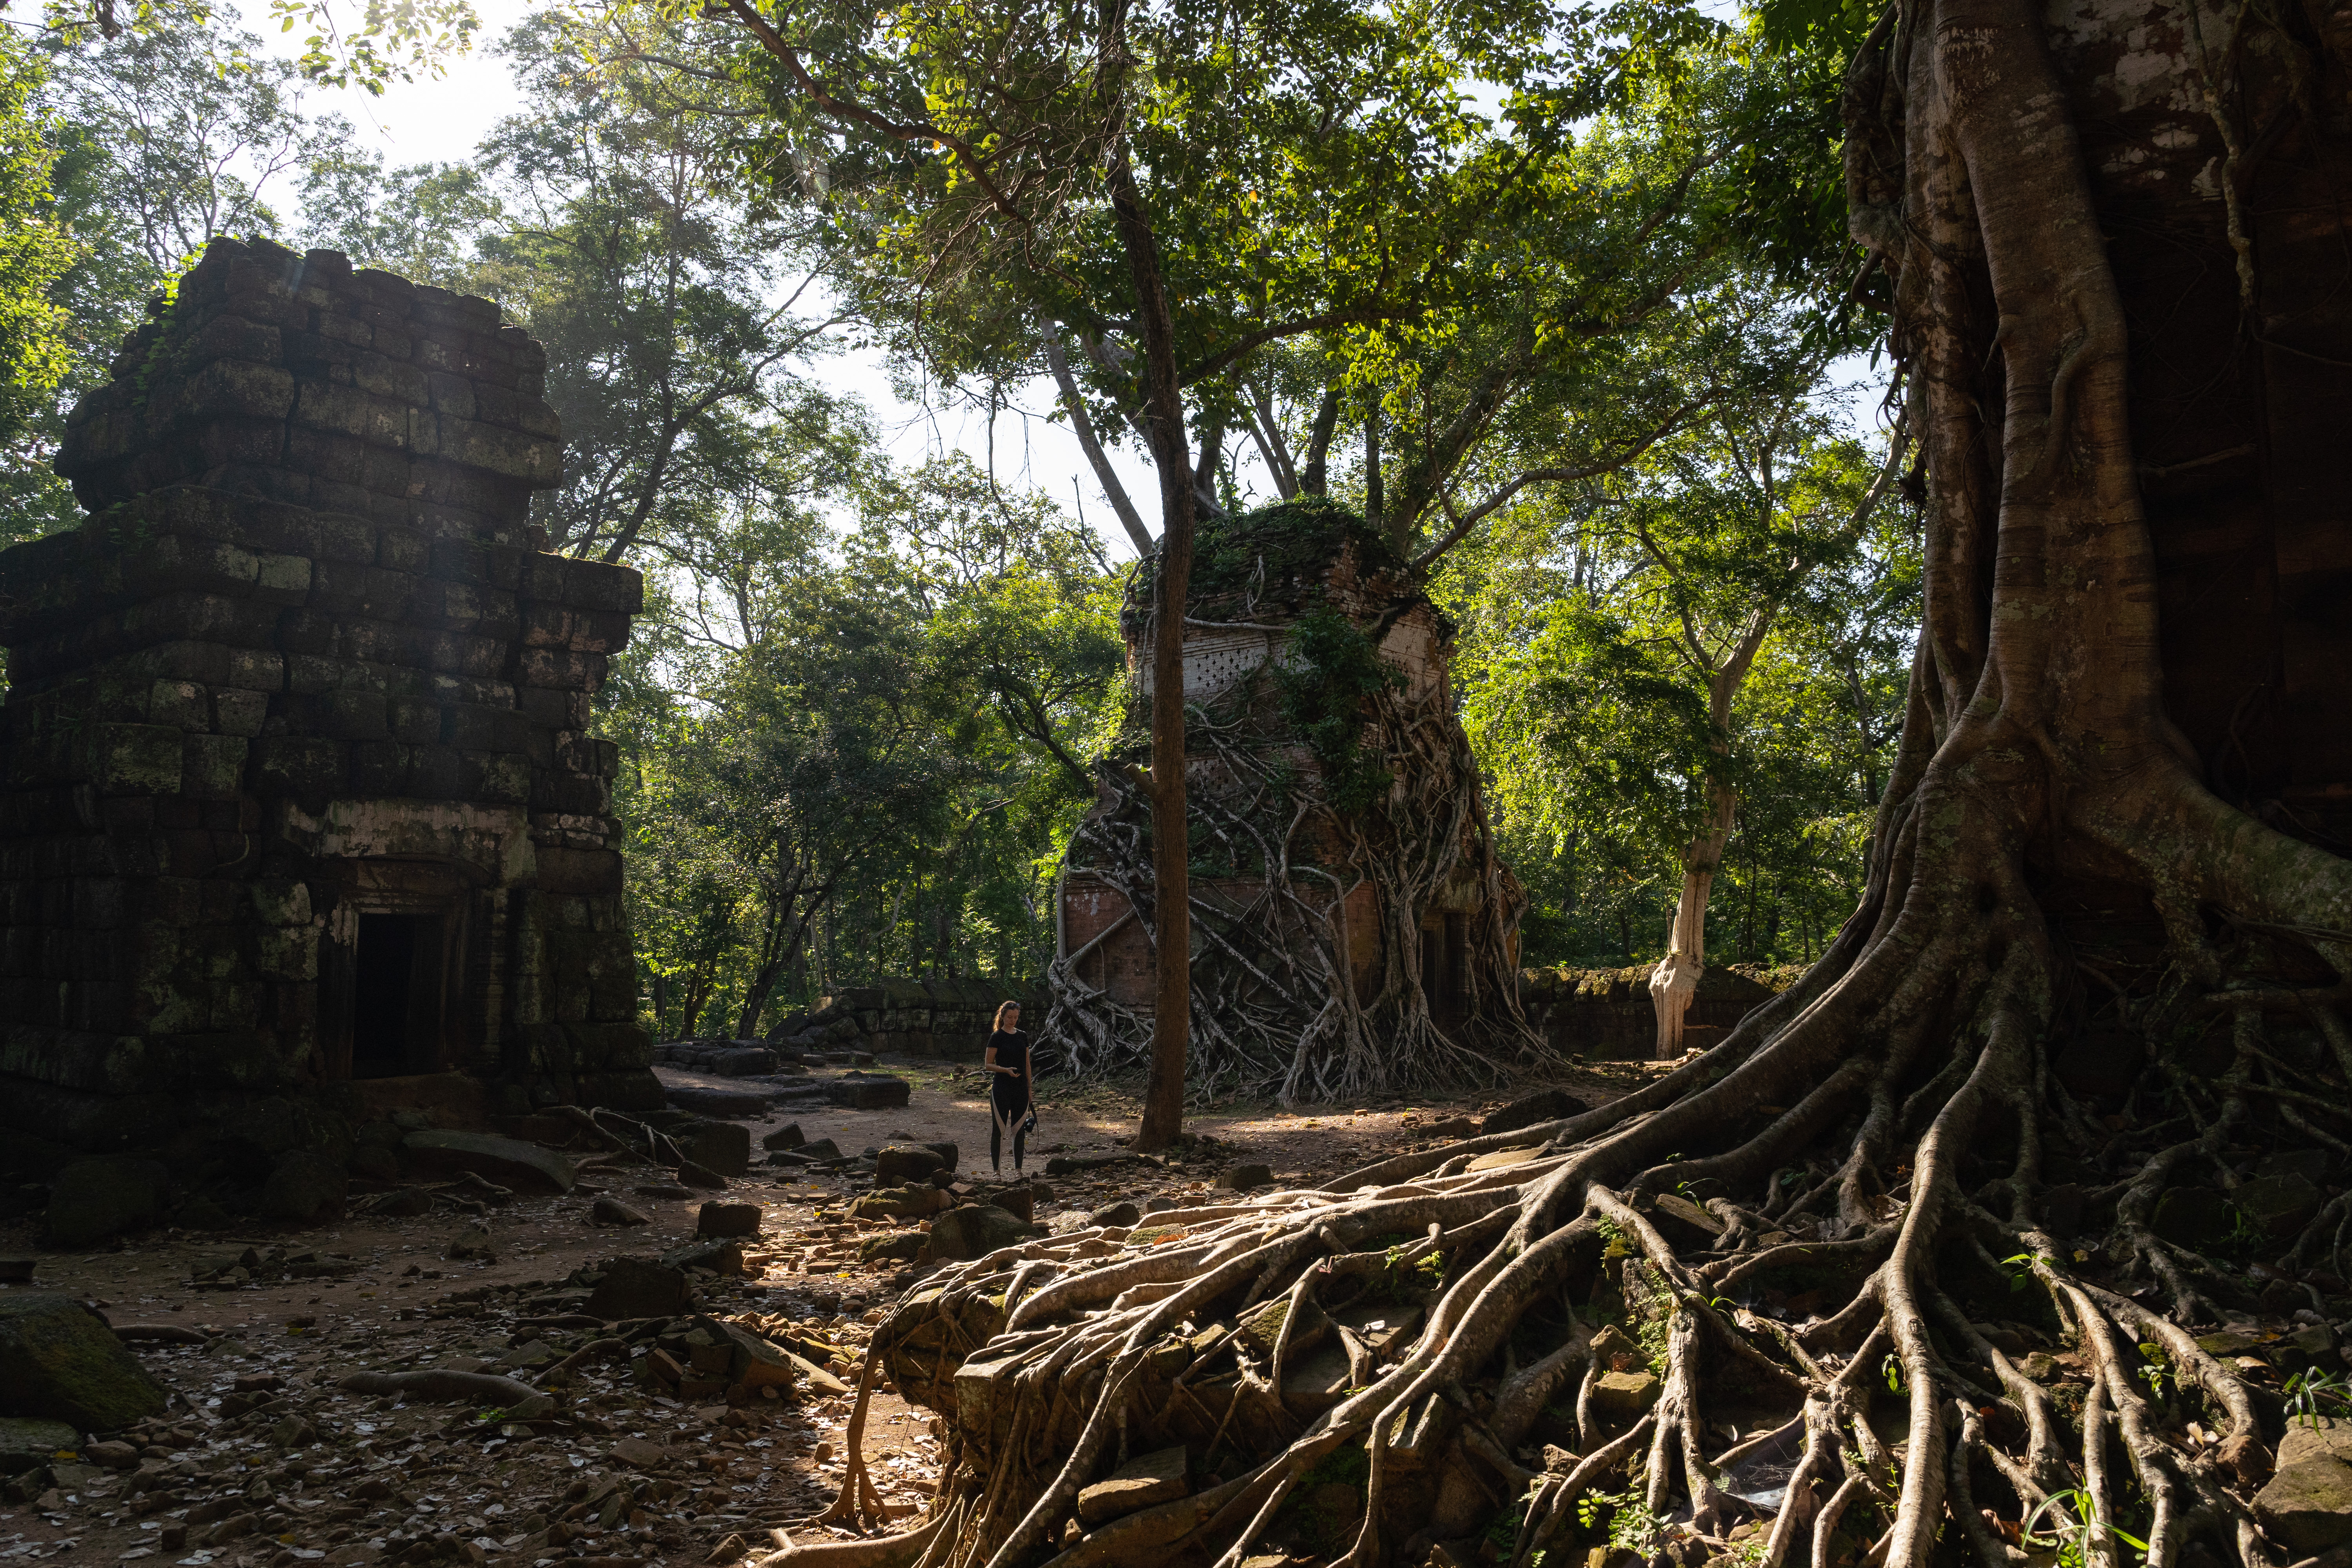 A woman stands among the structures at Koh Ker on Oct. 26, 2019. (Photo by Thomas Cristofoletti, Ruom/Special to The Denver Post)